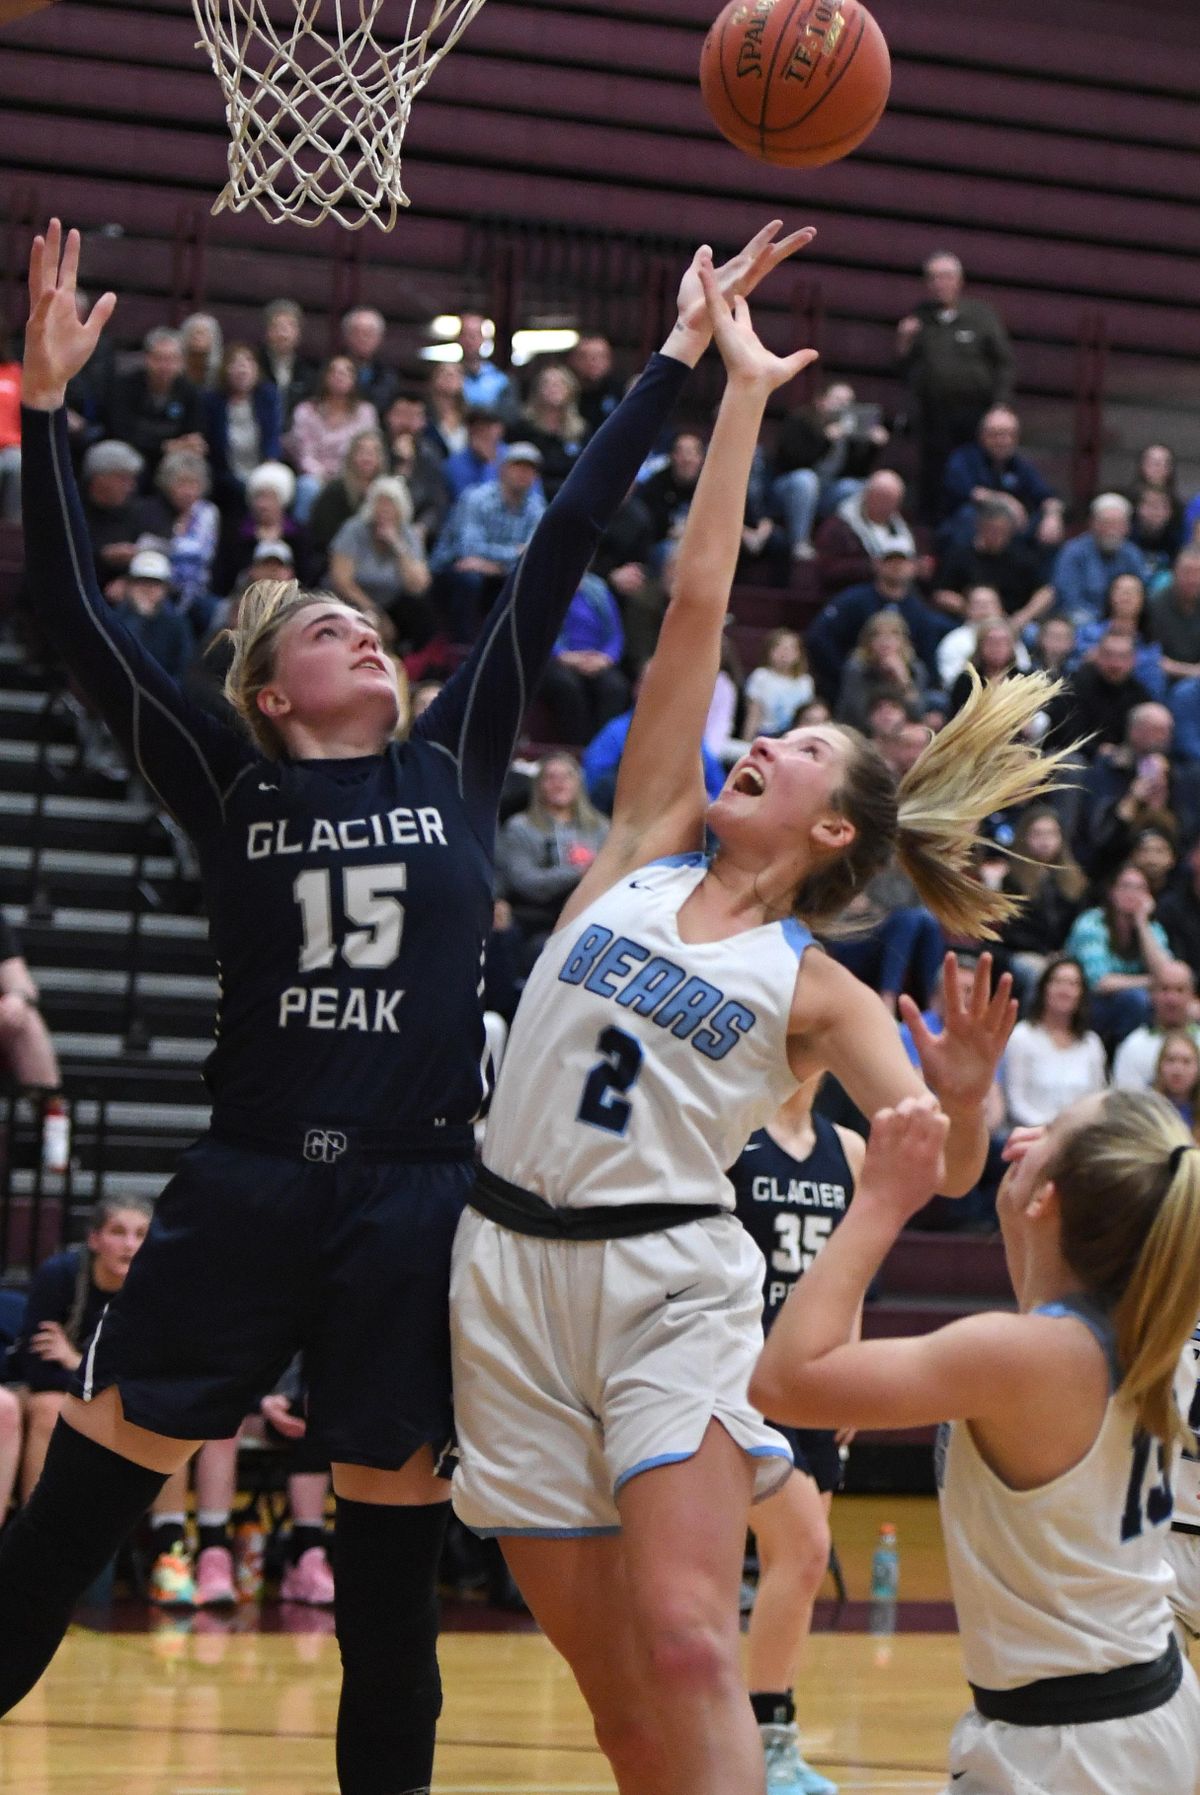 Central Valley forward Michael Pitts (2) and Glacier Peak post Madison Rubino (15) reach for a rebound during a girls 4A regional high school basketball playoff game, Friday, Feb. 28, 2020, at University High School. (Colin Mulvany / The Spokesman-Review)